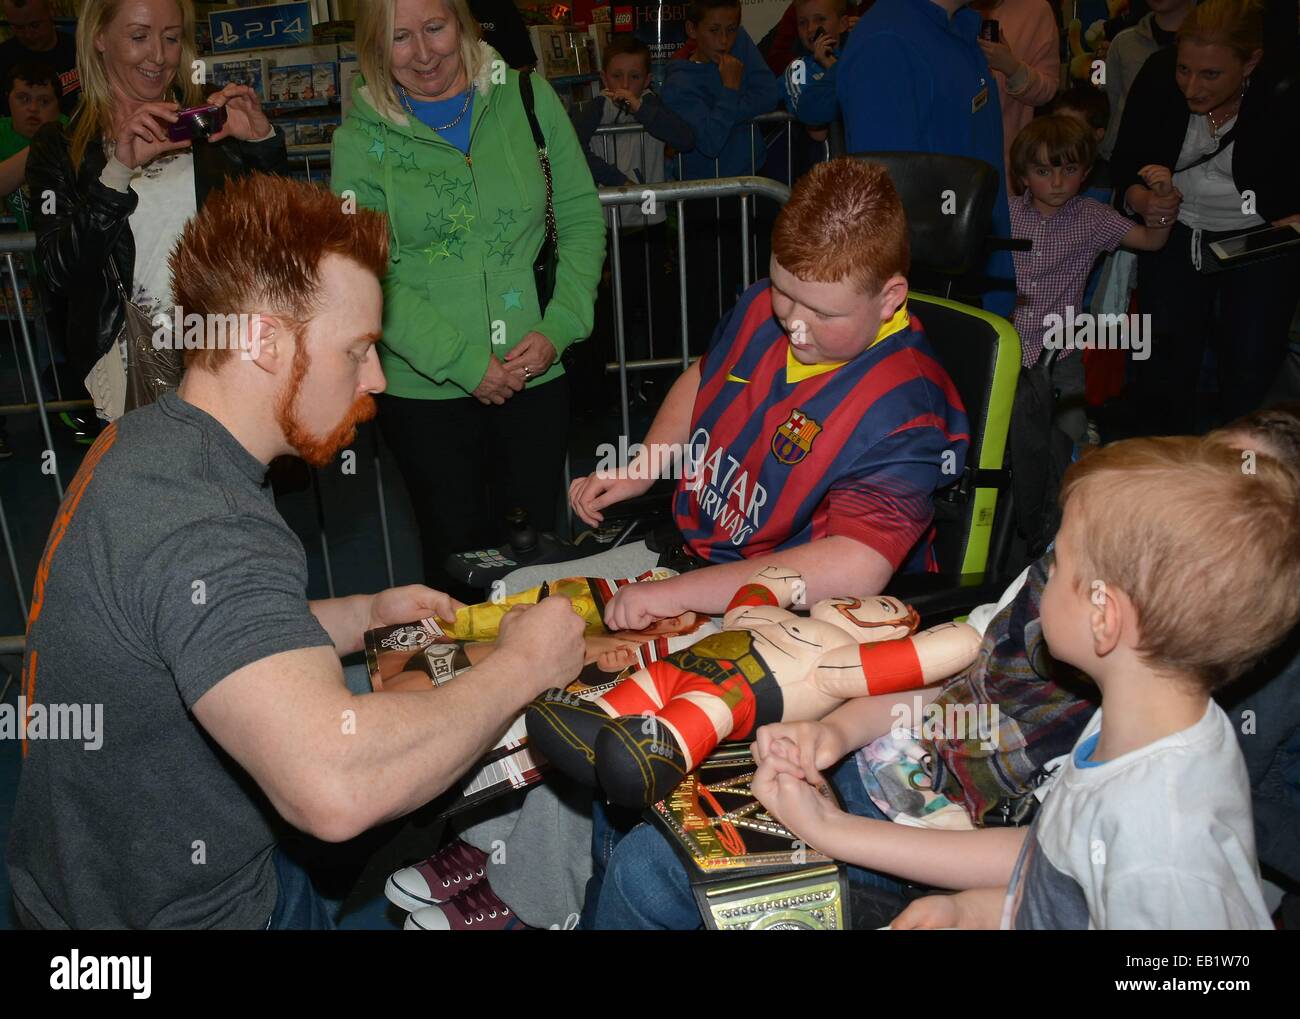 WWE Superstar & United States Champion Sheamus meets hundreds of fans at Smyths Toy Store on Jervis Street...  Featuring: Sheamus & fan Sean Rooney Where: Dublin, Ireland When: 22 May 2014 Stock Photo